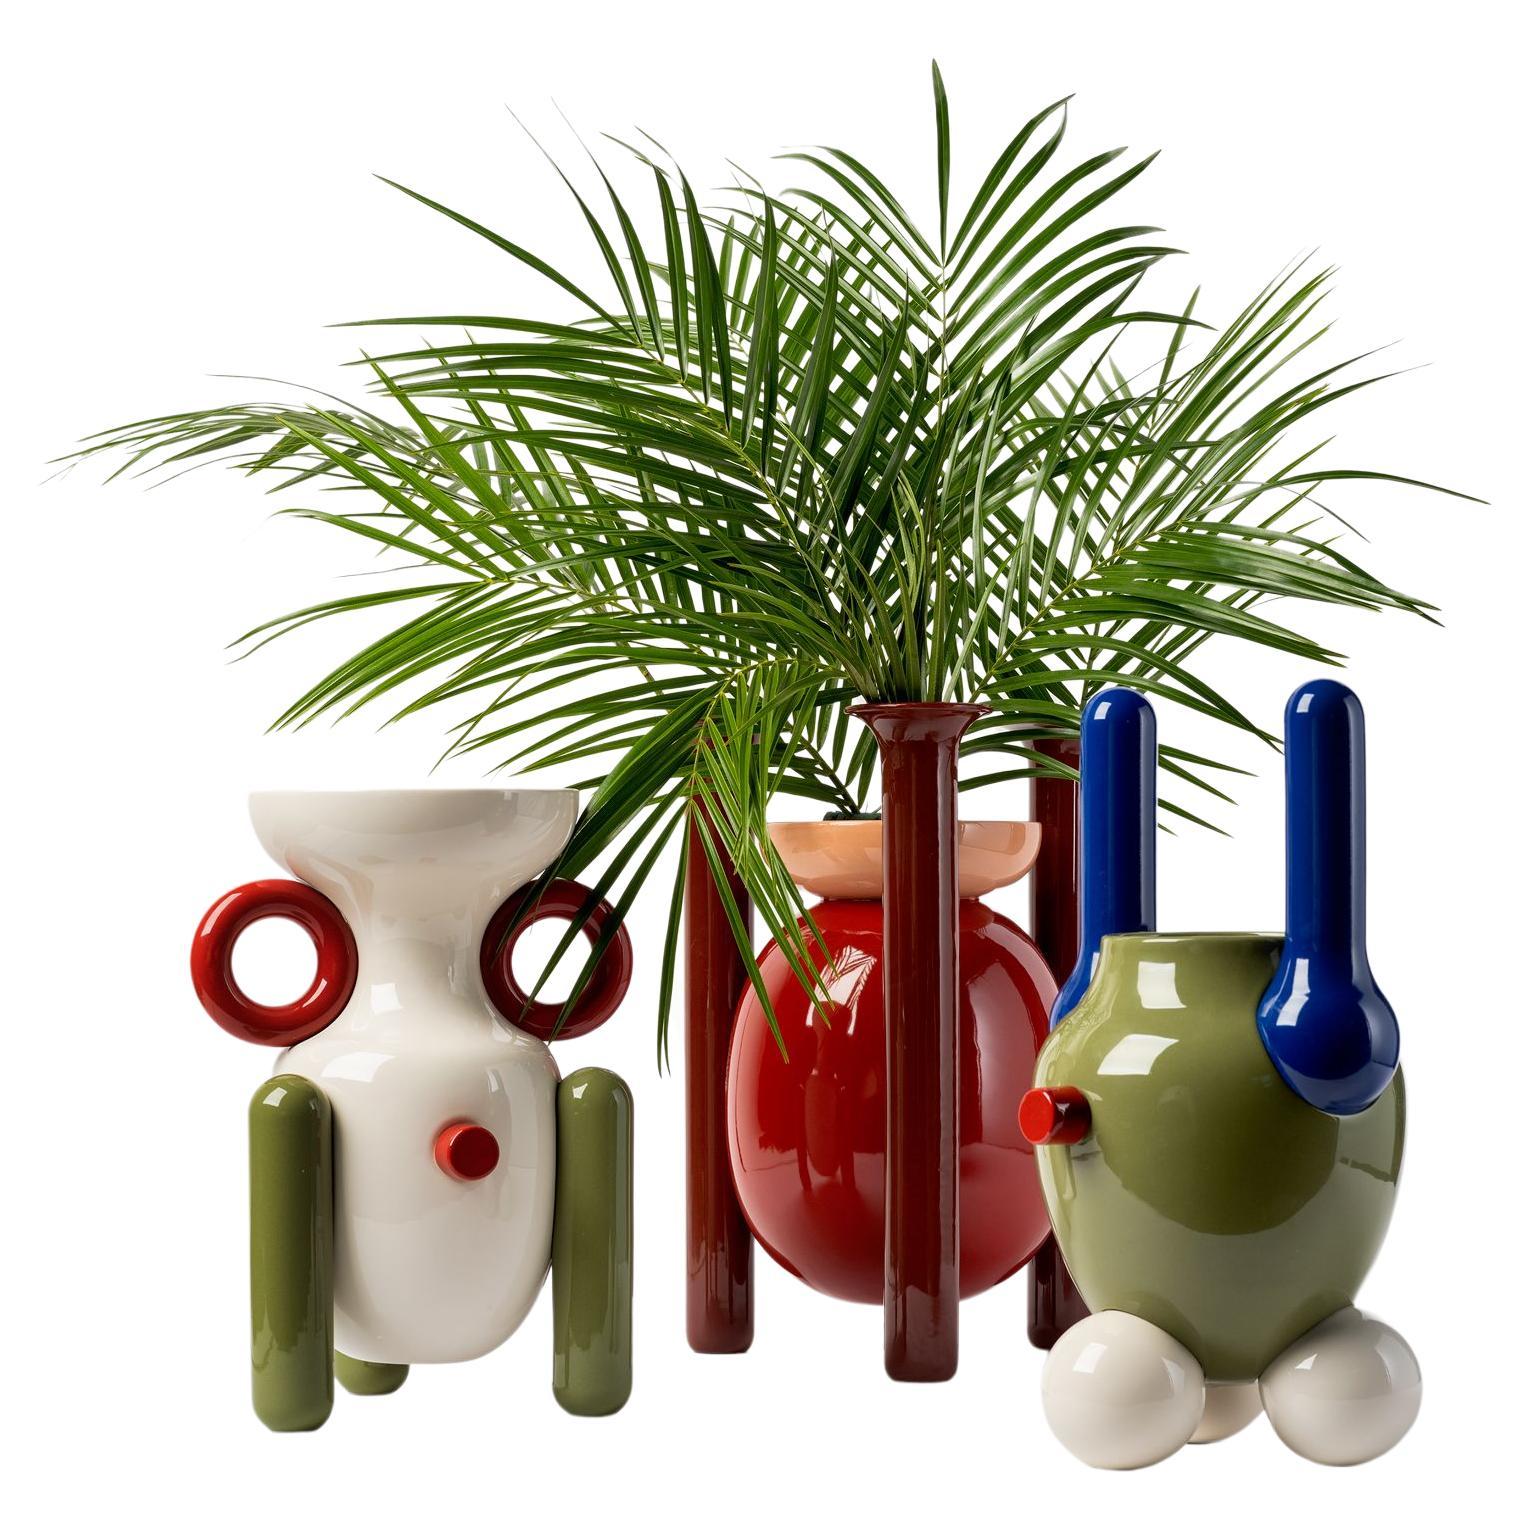 Set of 3 Contemporary Glazed Ceramic Vases, Explorer Collection by Jaime Hayon